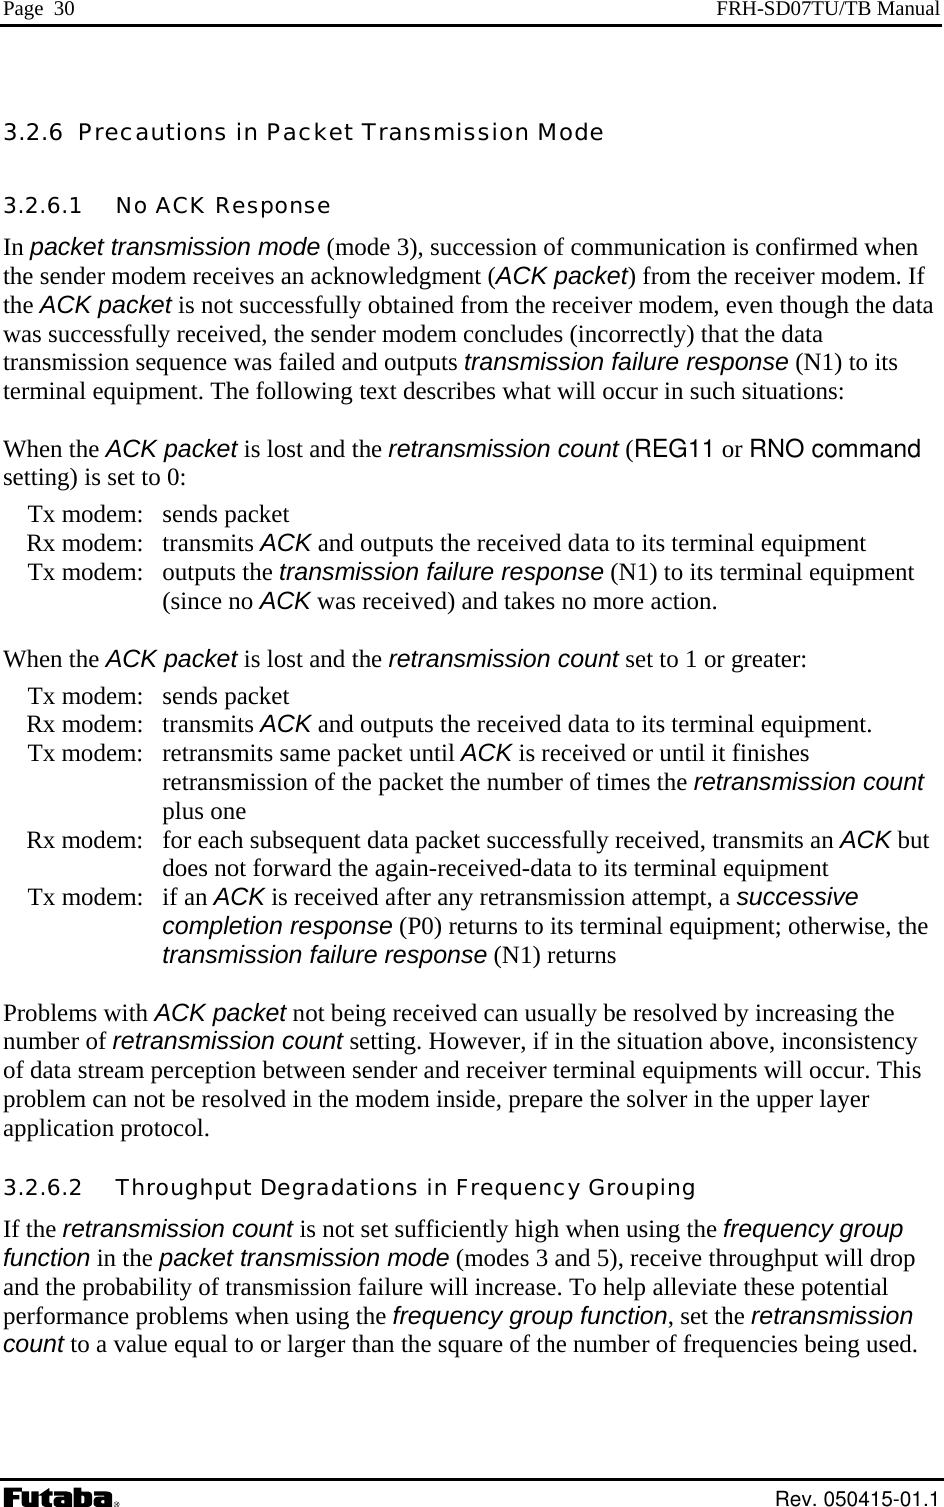 Page  30  FRH-SD07TU/TB Manual 3.2.6  Precautions in Packet Transmission Mode 3.2.6.1   No ACK Response In packet transmission mode (mode 3), succession of communication is confirmed when the sender modem receives an acknowledgment (ACK packet) from the receiver modem. If the ACK packet is not successfully obtained from the receiver modem, even though the data was successfully received, the sender modem concludes (incorrectly) that the data transmission sequence was failed and outputs transmission failure response (N1) to its terminal equipment. The following text describes what will occur in such situations:  When the ACK packet is lost and the retransmission count (REG11 or RNO command setting) is set to 0:  Tx modem: sends packet  Rx modem: transmits ACK and outputs the received data to its terminal equipment  Tx modem: outputs the transmission failure response (N1) to its terminal equipment (since no ACK was received) and takes no more action.  When the ACK packet is lost and the retransmission count set to 1 or greater:  Tx modem: sends packet  Rx modem: transmits ACK and outputs the received data to its terminal equipment.   Tx modem:  retransmits same packet until ACK is received or until it finishes retransmission of the packet the number of times the retransmission count plus one   Rx modem:  for each subsequent data packet successfully received, transmits an ACK but does not forward the again-received-data to its terminal equipment  Tx modem: if an ACK is received after any retransmission attempt, a successive completion response (P0) returns to its terminal equipment; otherwise, the transmission failure response (N1) returns  Problems with ACK packet not being received can usually be resolved by increasing the number of retransmission count setting. However, if in the situation above, inconsistency of data stream perception between sender and receiver terminal equipments will occur. This problem can not be resolved in the modem inside, prepare the solver in the upper layer application protocol. 3.2.6.2   Throughput Degradations in Frequency Grouping If the retransmission count is not set sufficiently high when using the frequency group function in the packet transmission mode (modes 3 and 5), receive throughput will drop and the probability of transmission failure will increase. To help alleviate these potential performance problems when using the frequency group function, set the retransmission count to a value equal to or larger than the square of the number of frequencies being used.   Rev. 050415-01.1 